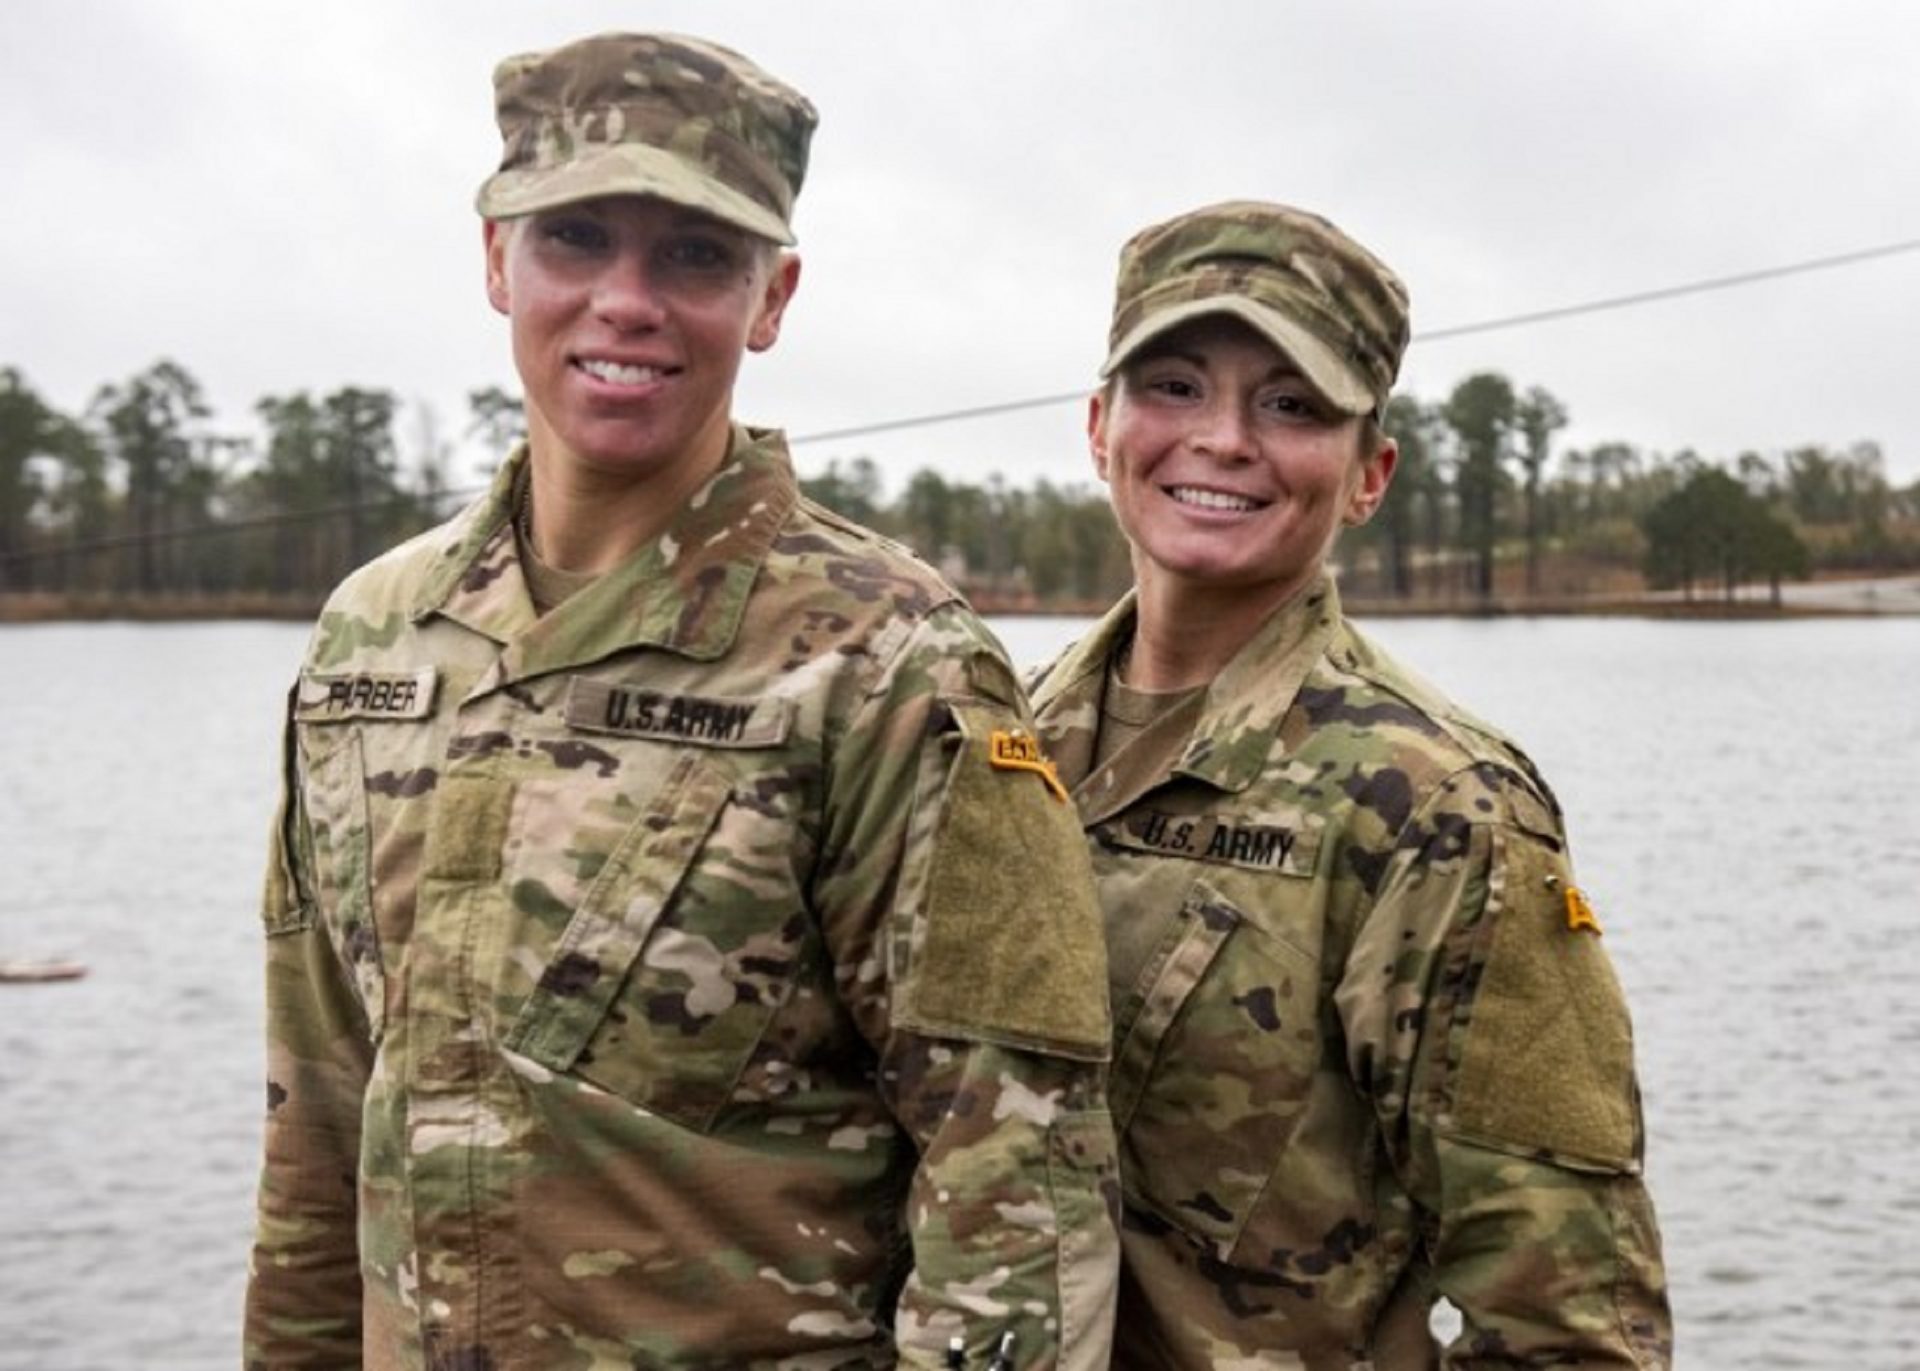 Sgt. Danielle Farber is the first female soldier from the Pennsylvania National Guard to finish U.S. Army Ranger School. Today she is speaking at Fort Indiantown Gap, where she is an instructor at the Medical Battalion Training Site.